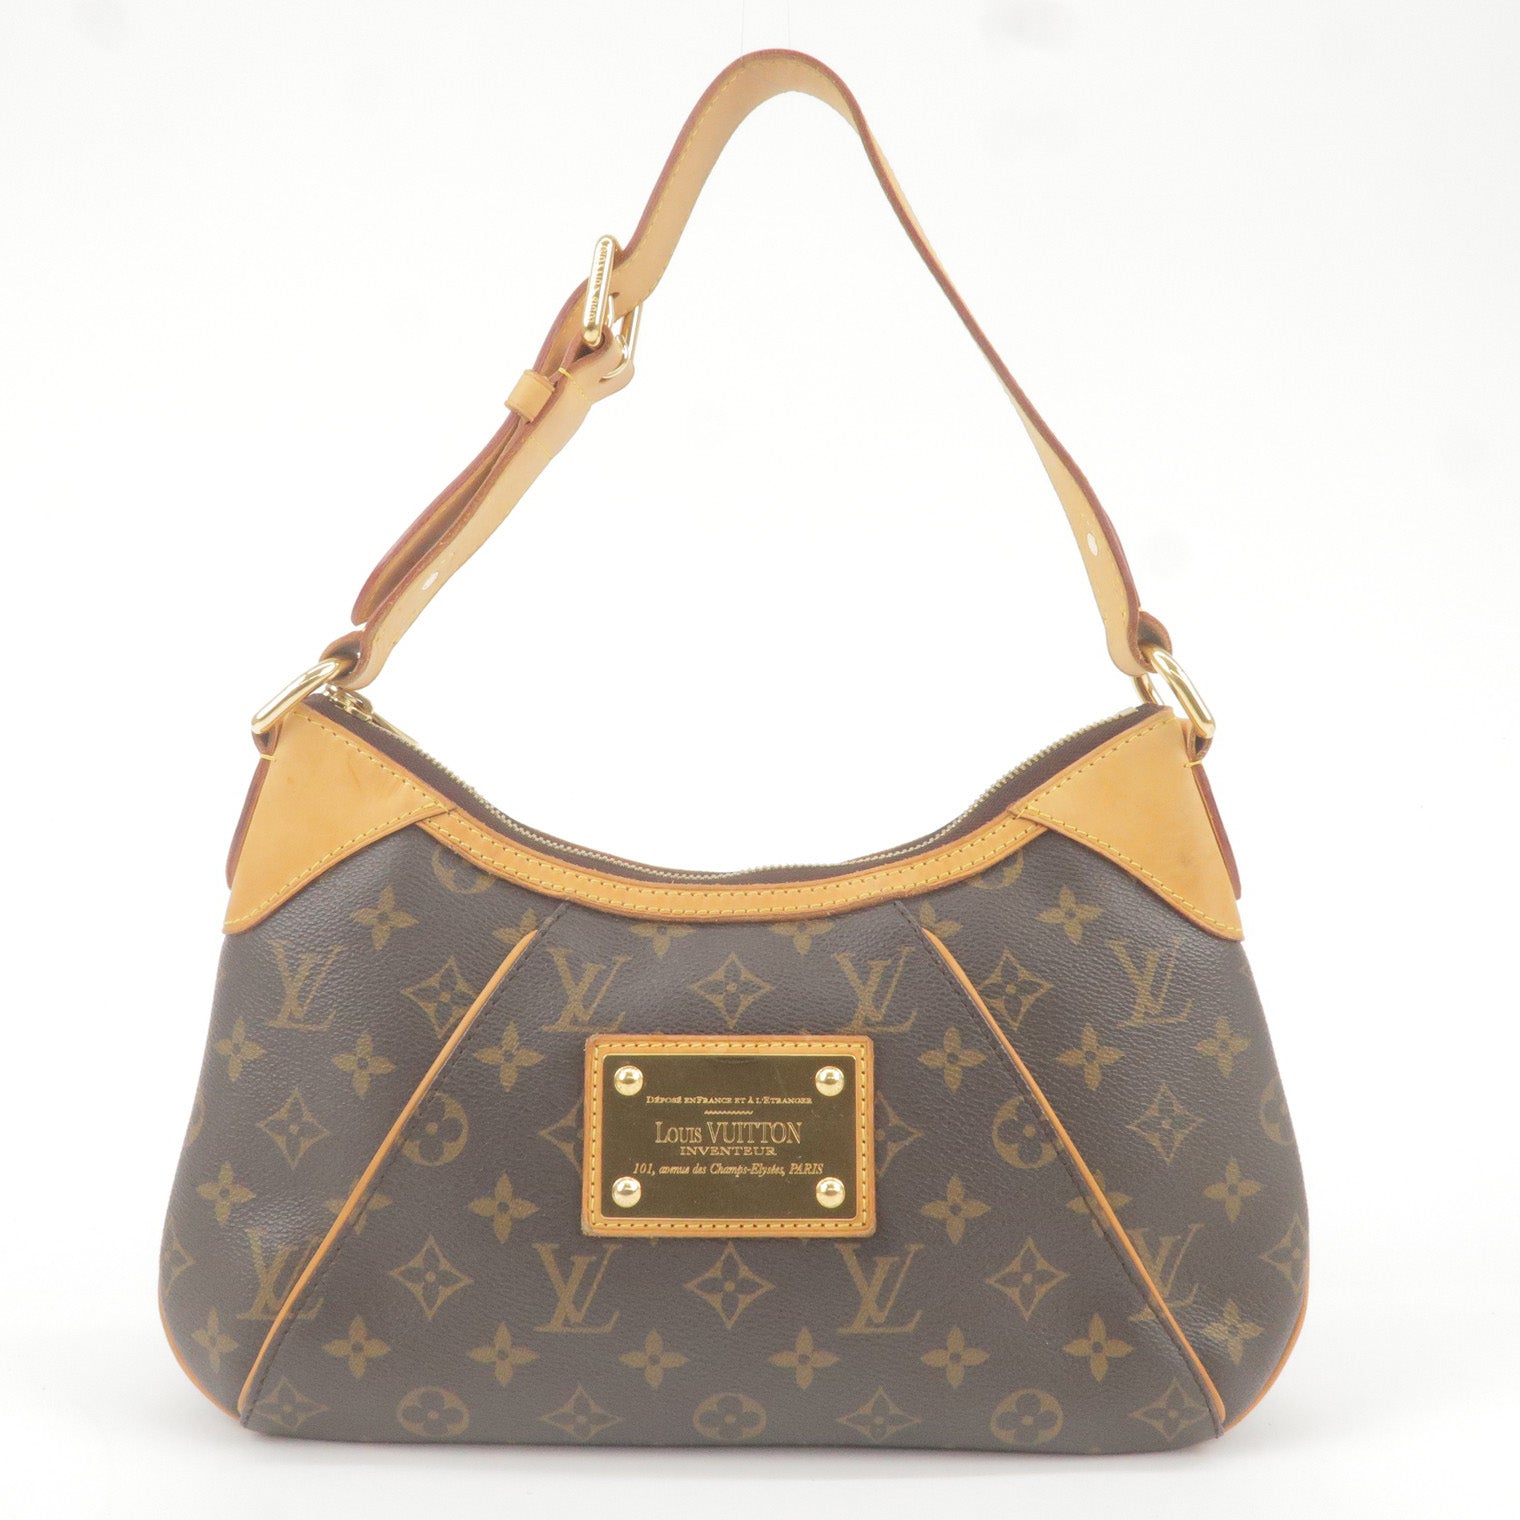 LOUIS VUITTON Biface: Why I Ended Up Returning It